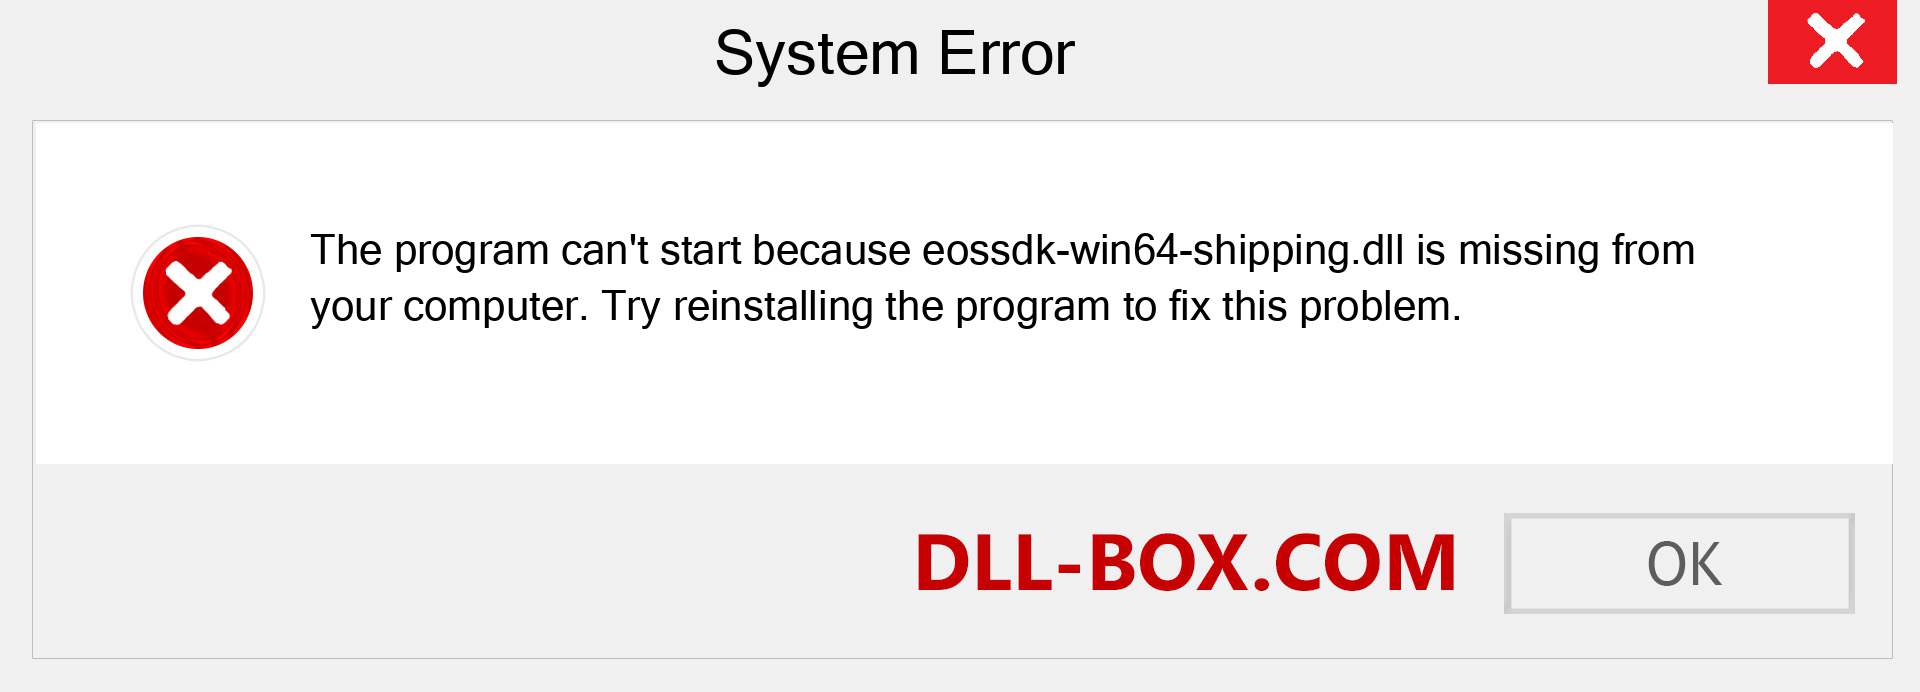  eossdk-win64-shipping.dll file is missing?. Download for Windows 7, 8, 10 - Fix  eossdk-win64-shipping dll Missing Error on Windows, photos, images